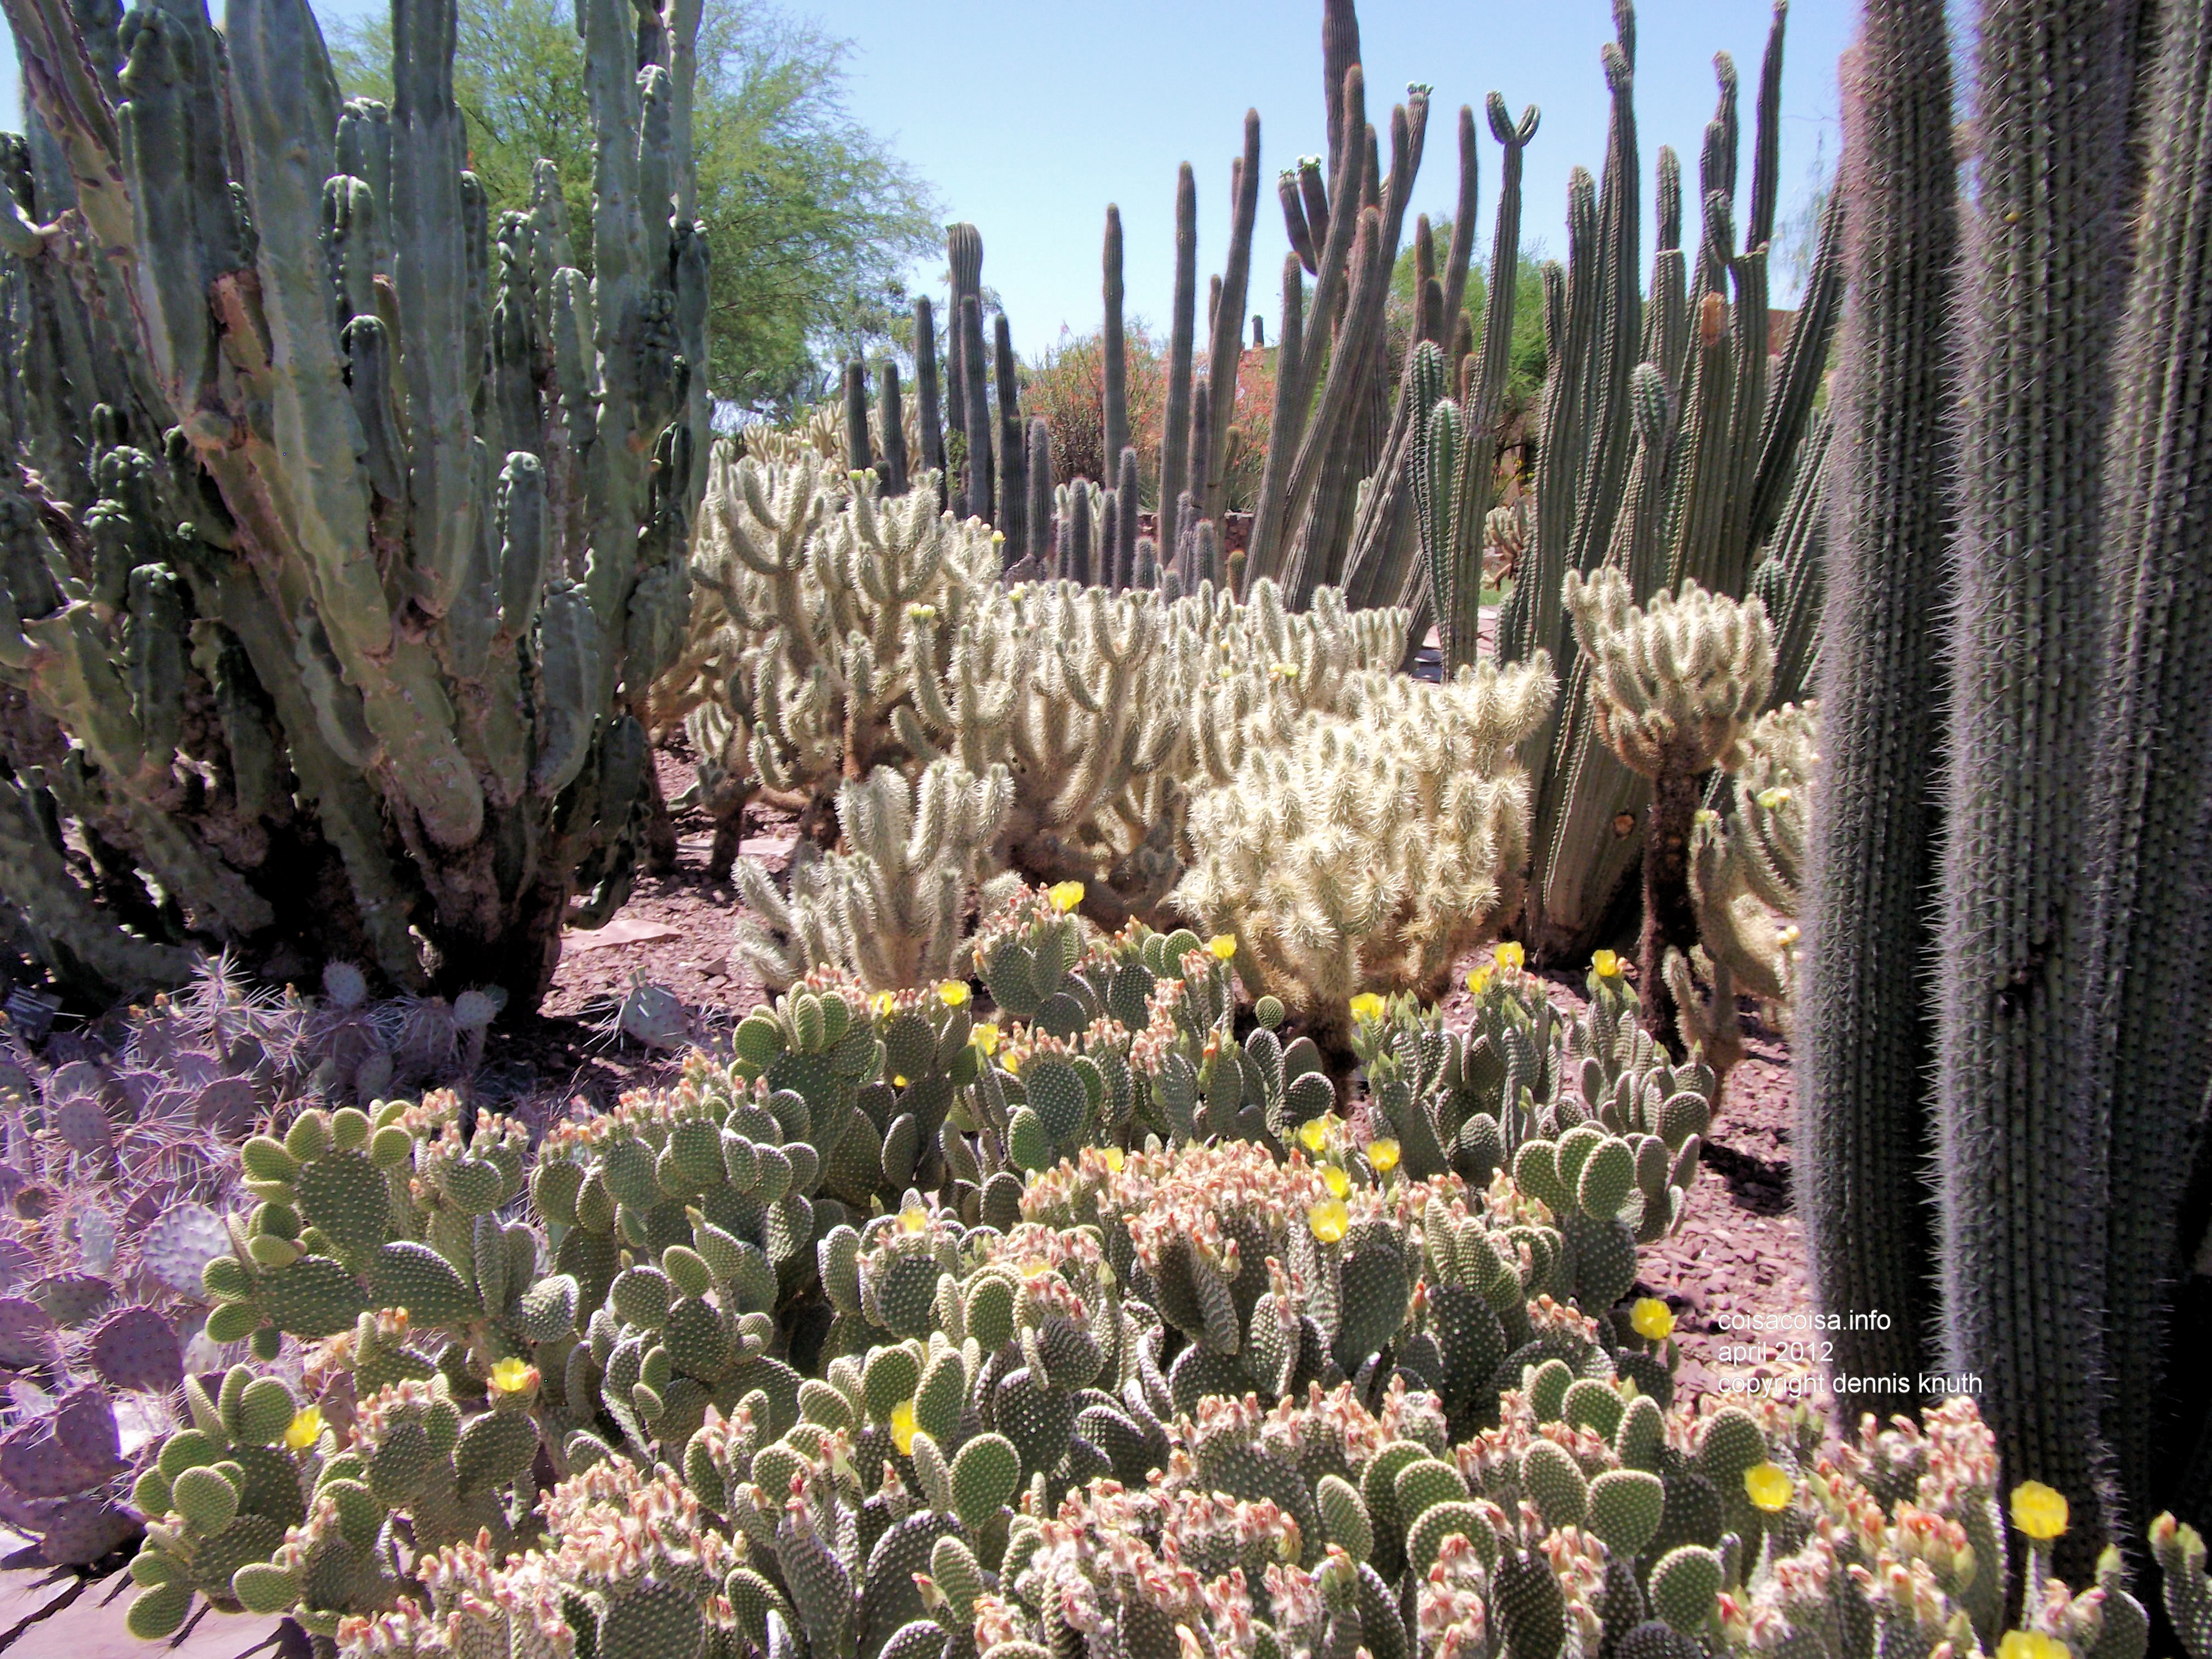 Mature group of cacti displayed featuring the Prickly Pear